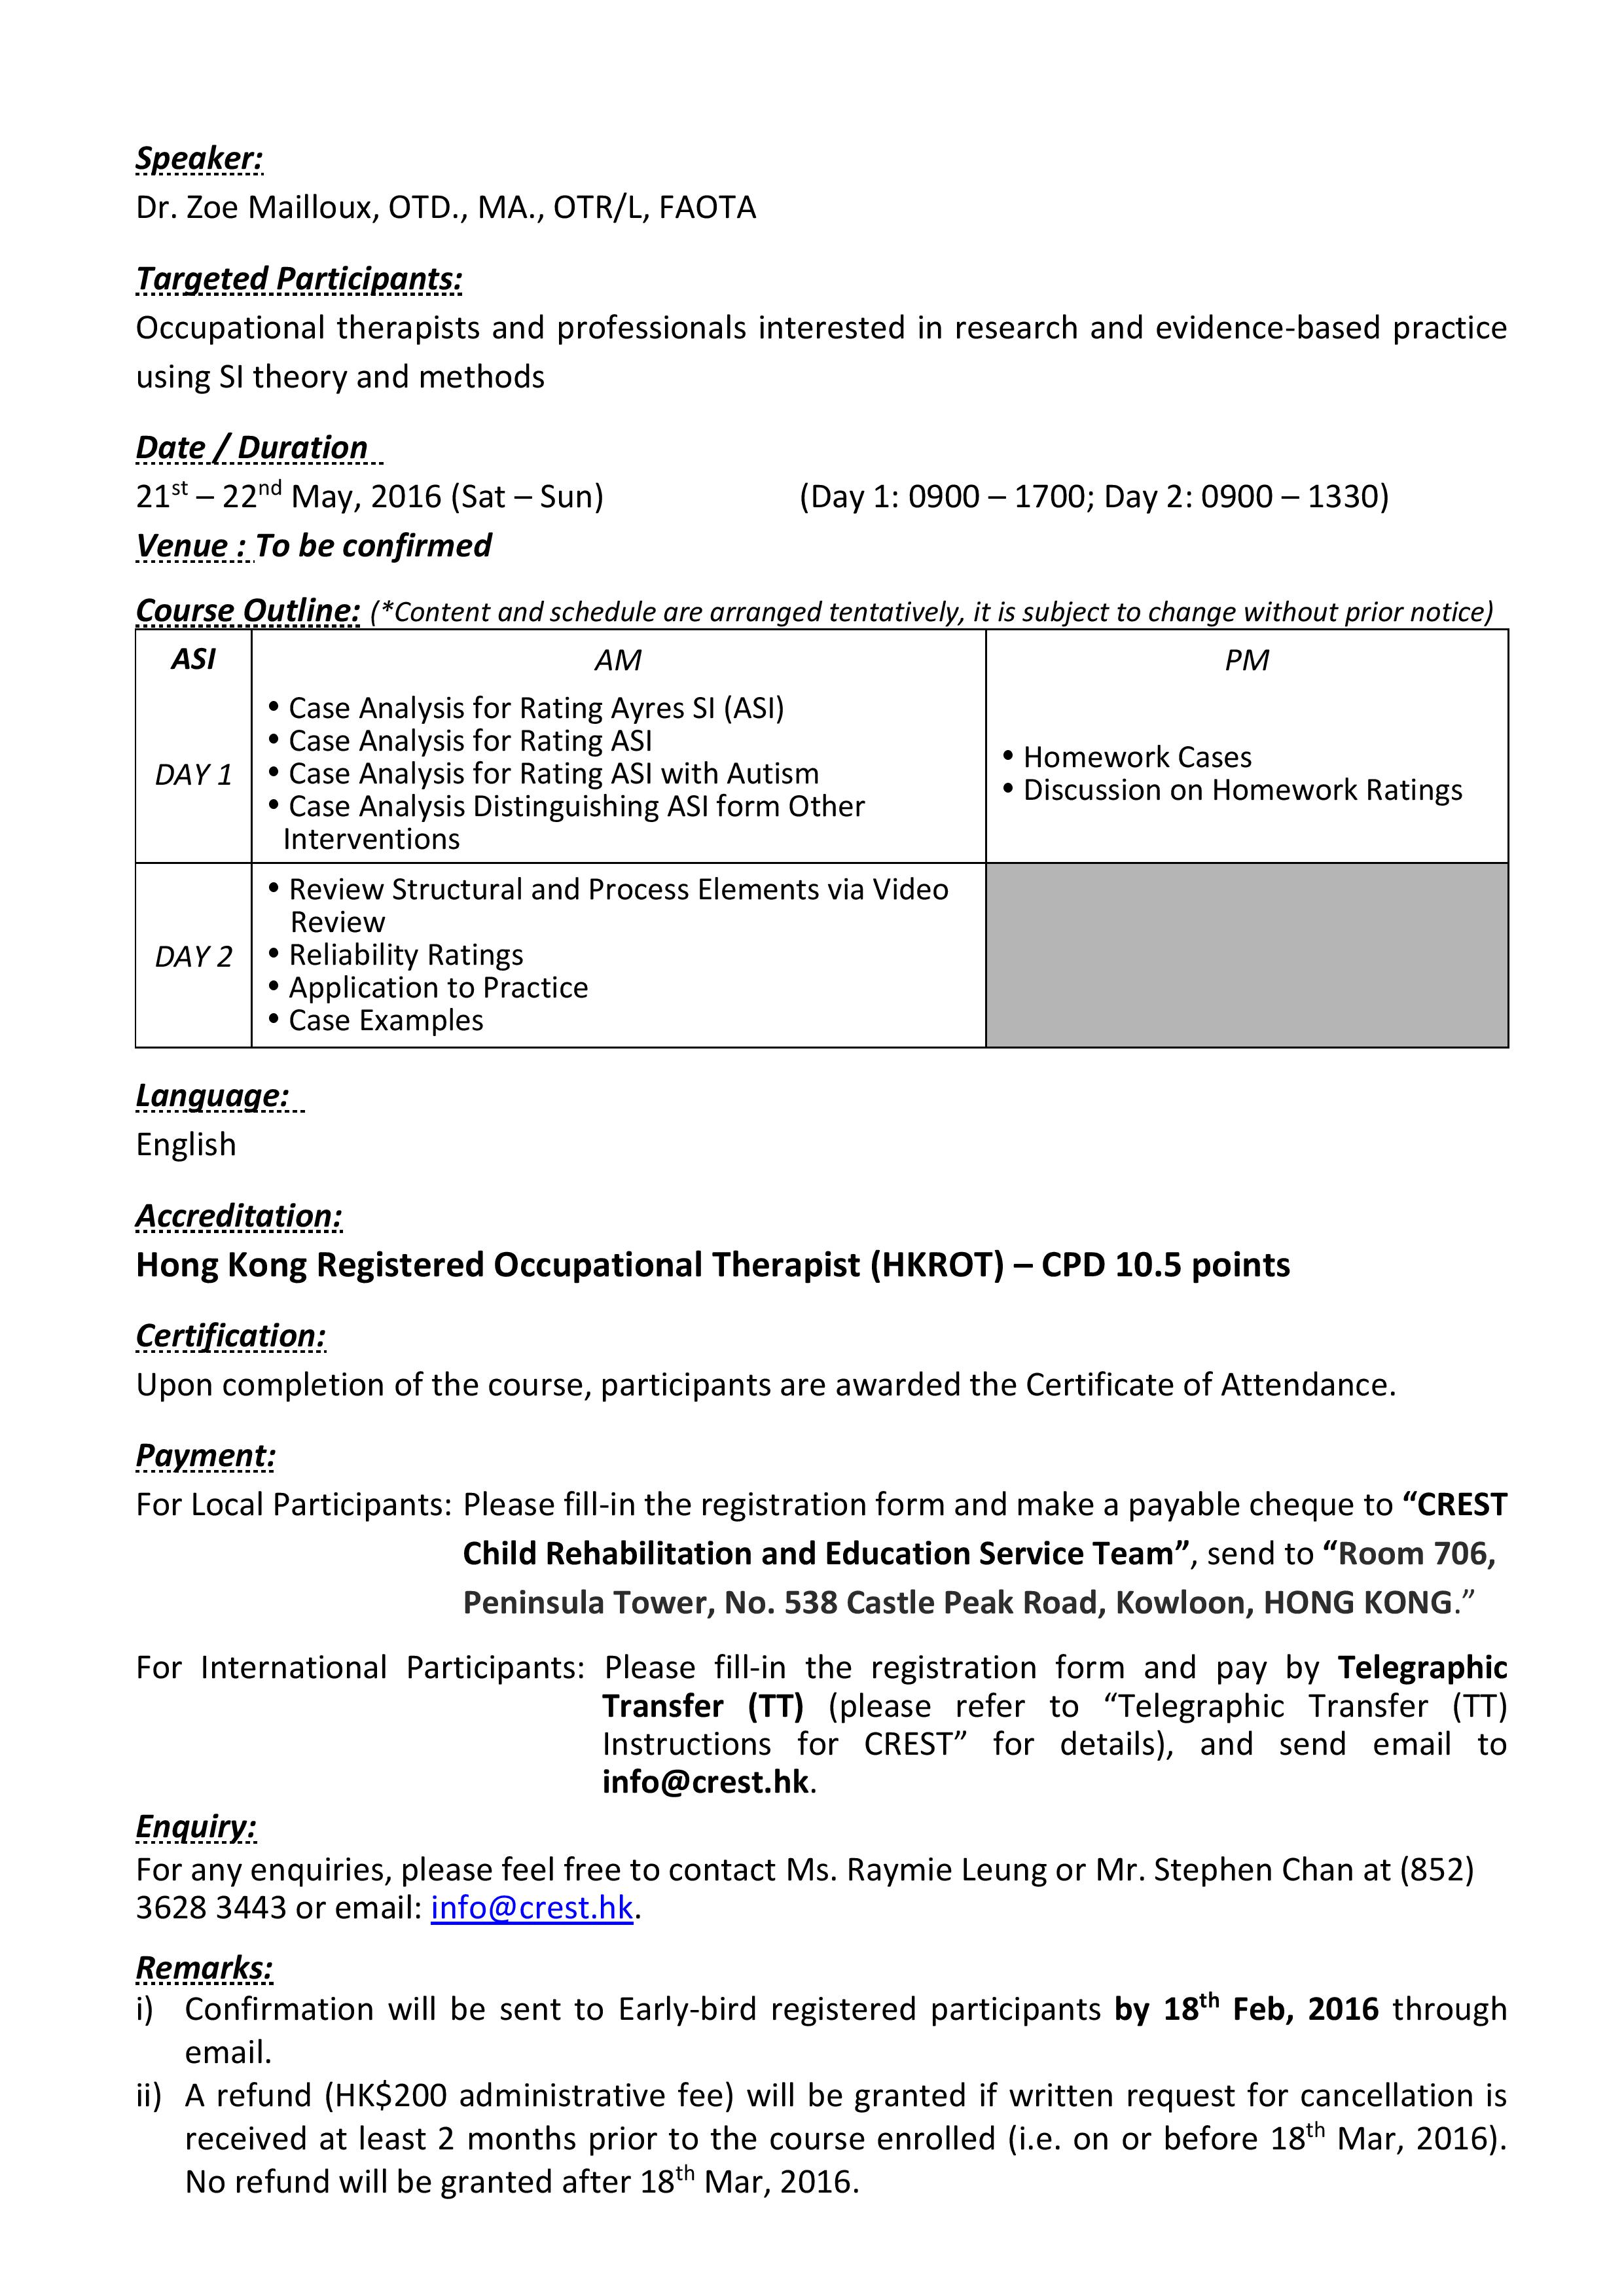 Course Info - ASI for ASD and ASI Intervention Fidelity Measure Training Information by CREST (EEB)-page-005